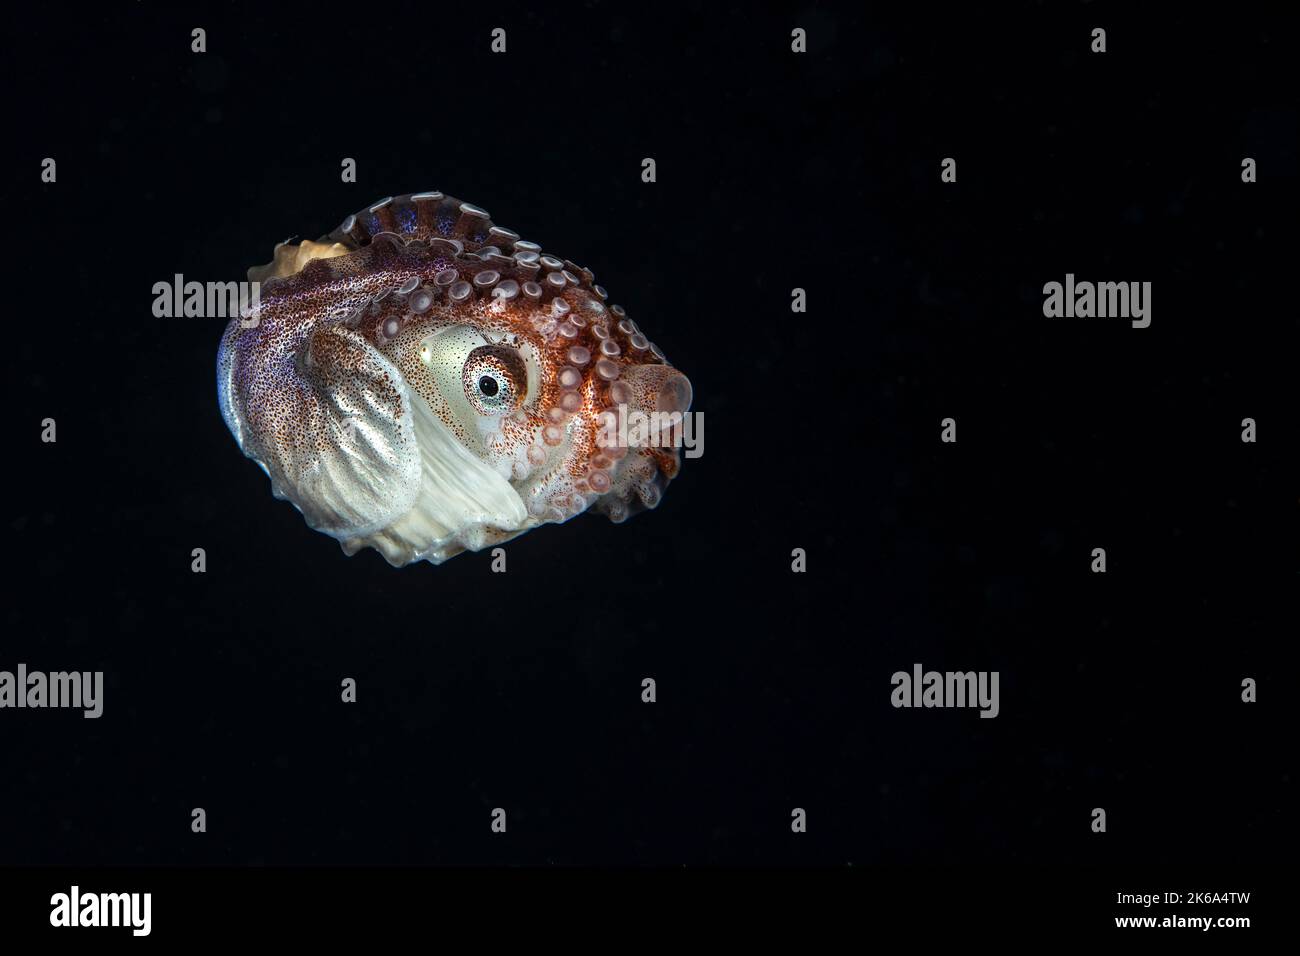 A female paper nautilus swims through the black water in search of a mate, Anilao, Philippines. Stock Photo